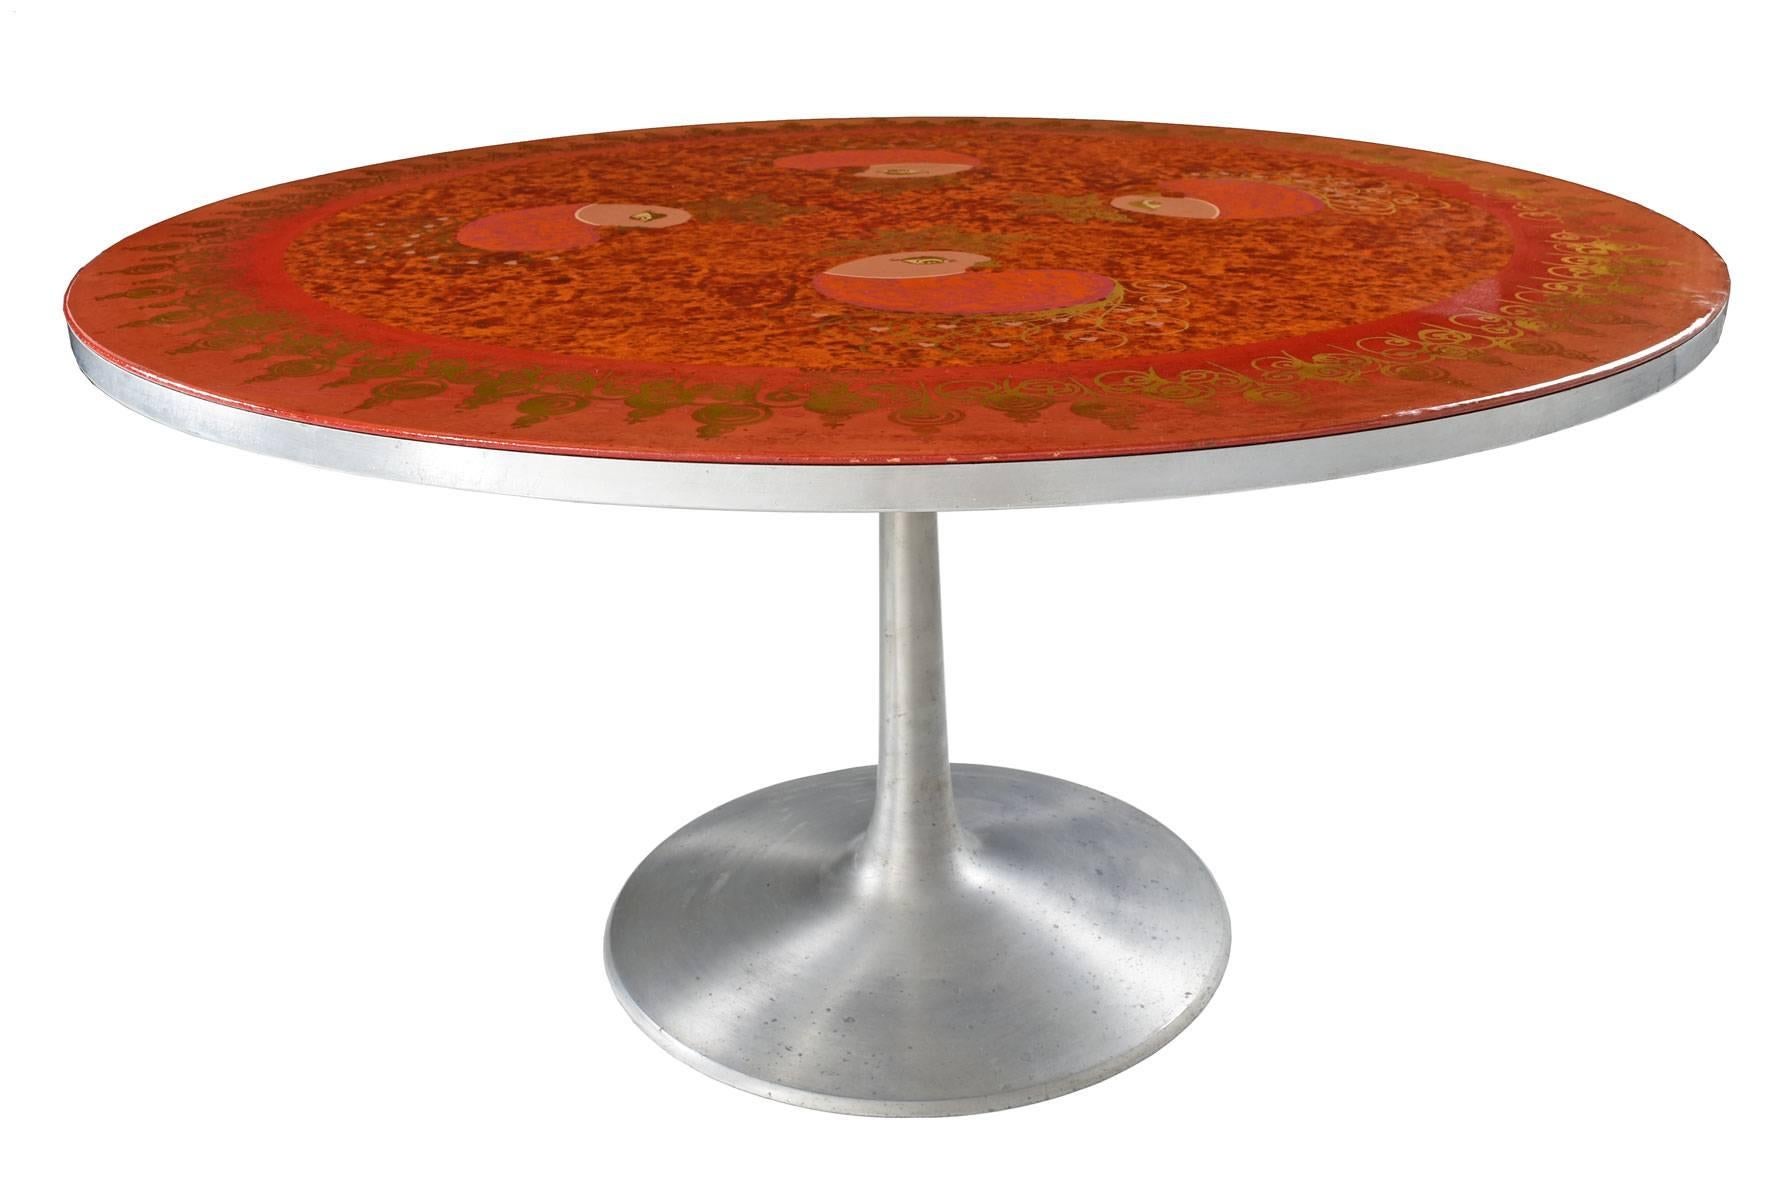 Poul Cadovius aluminium base dining table decorated by Susanne Fjeldsøe also known as the artist, Mygge. Signed. 

Original enamel finished has preserved the beautiful artwork underneath. However, sun fading has lighted one side of the table.